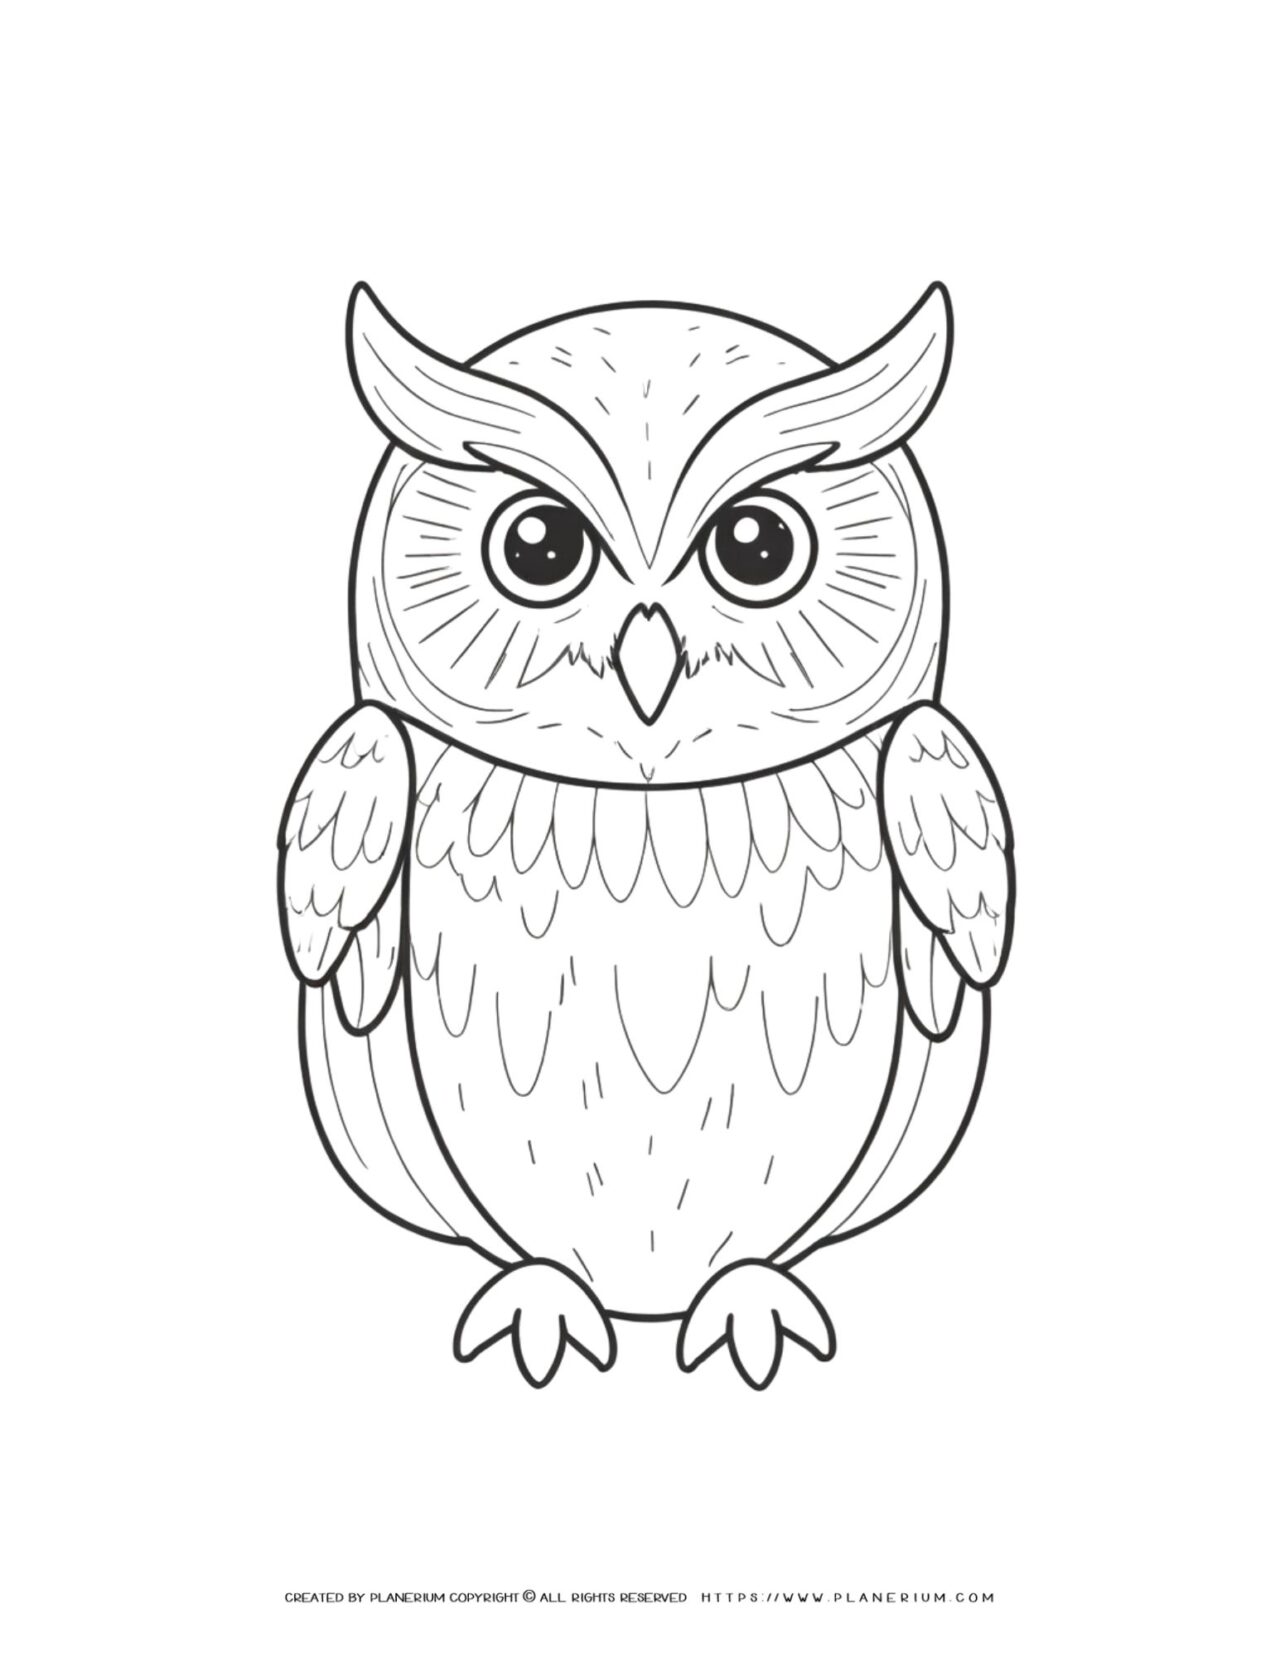 Detailed-Owl-Outline-Drawing-Coloring-Page-for-Kids